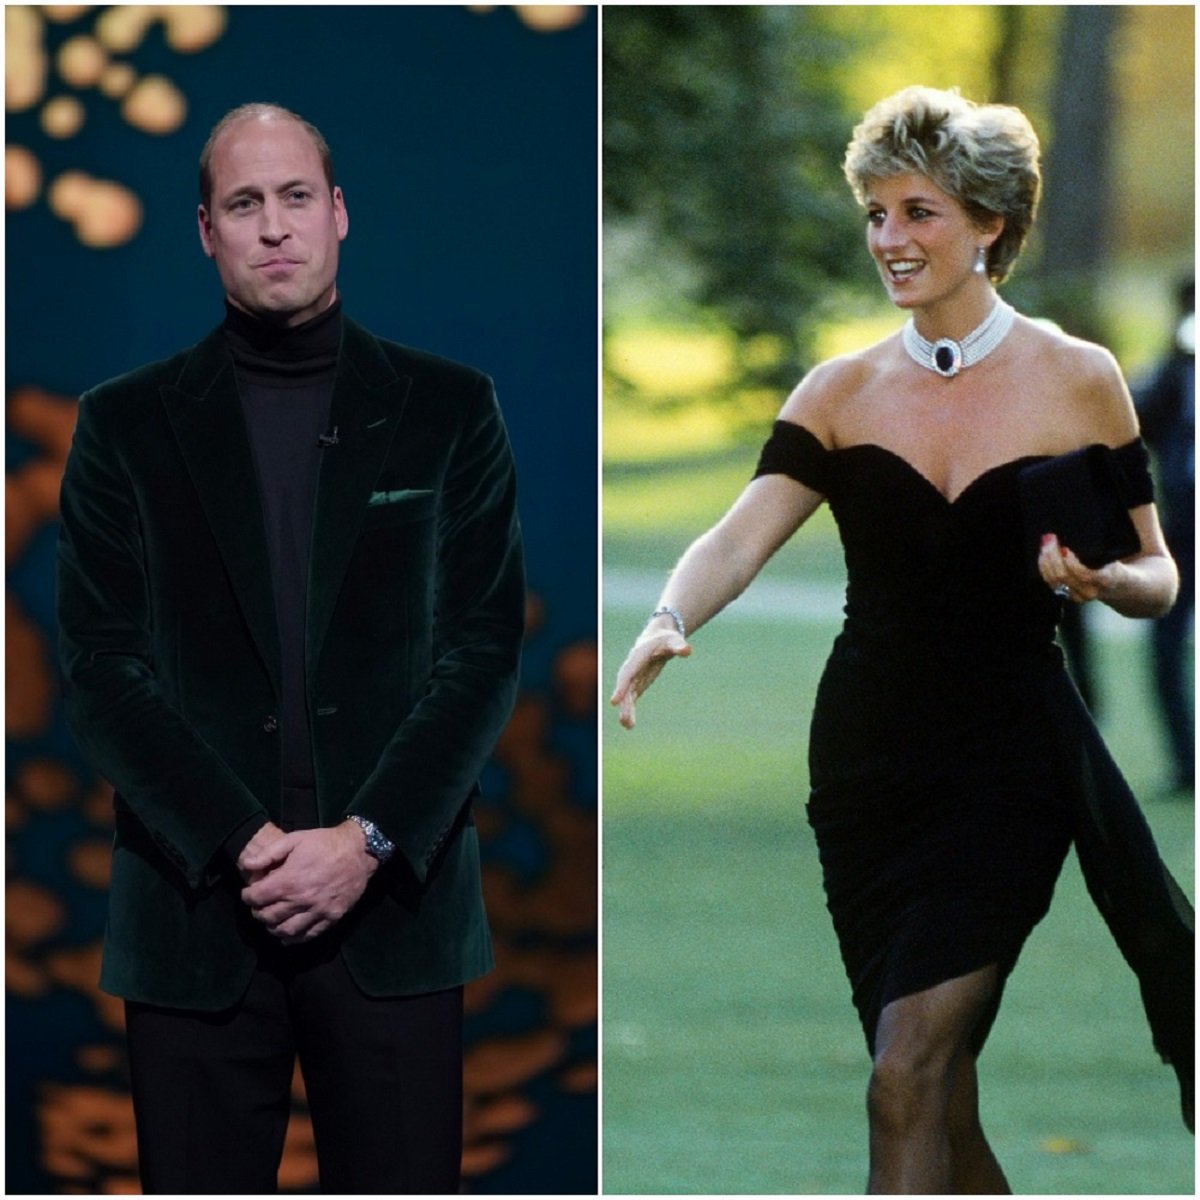 (L): Prince William standing on stage during the first Earthshot Prize awards ceremony, (R): Princess Diana donning iconic revenge dress